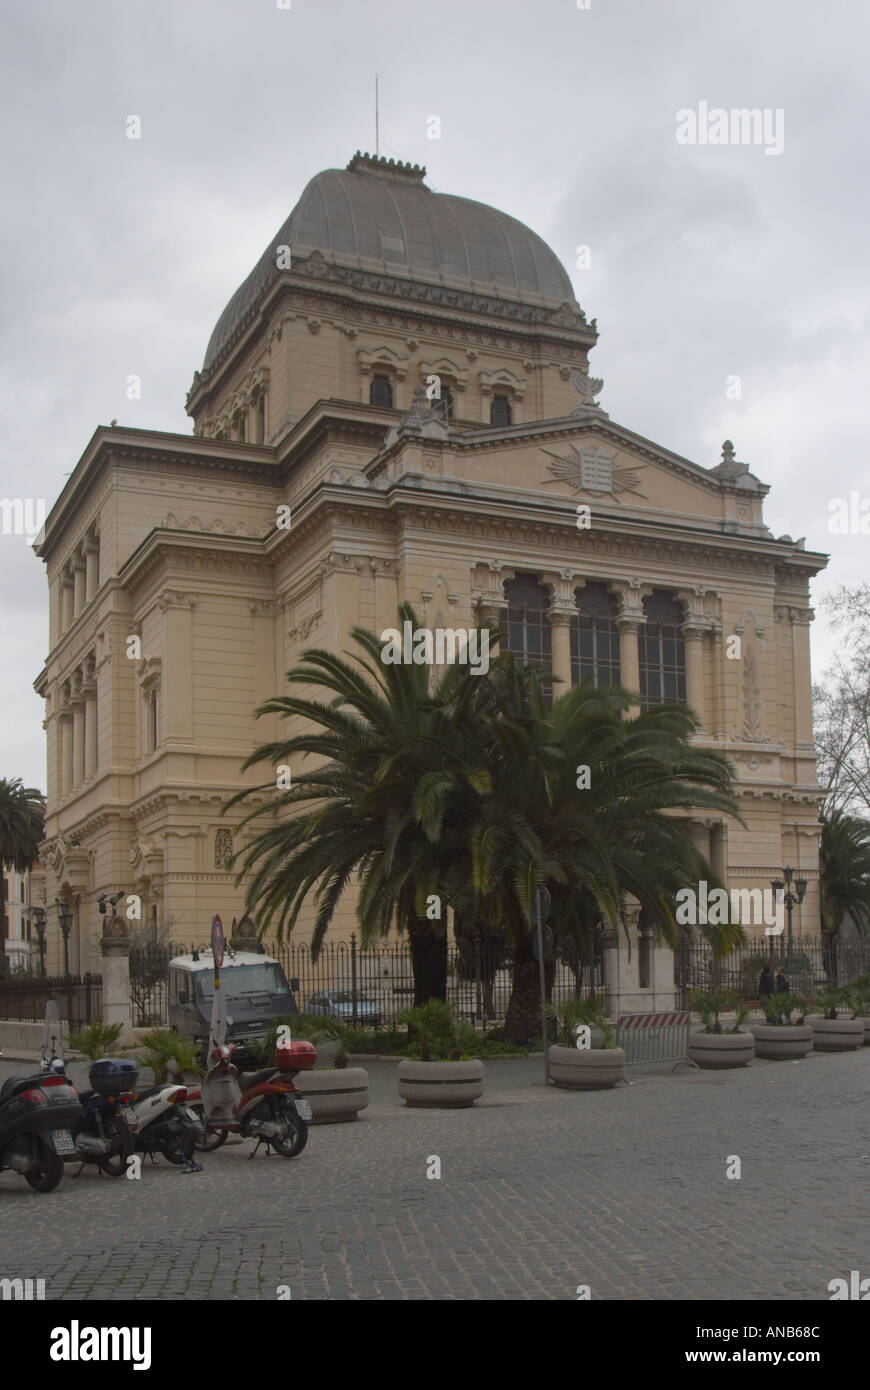 The Synagogue in the Ghetto.  This is the largest of Rome's synagogues and is sits on what was one quarter of the old Jewish Ghetto.  The synagogue also contains a Museum of Jewish Culture, The Museo Ebraico di Roma. Stock Photo